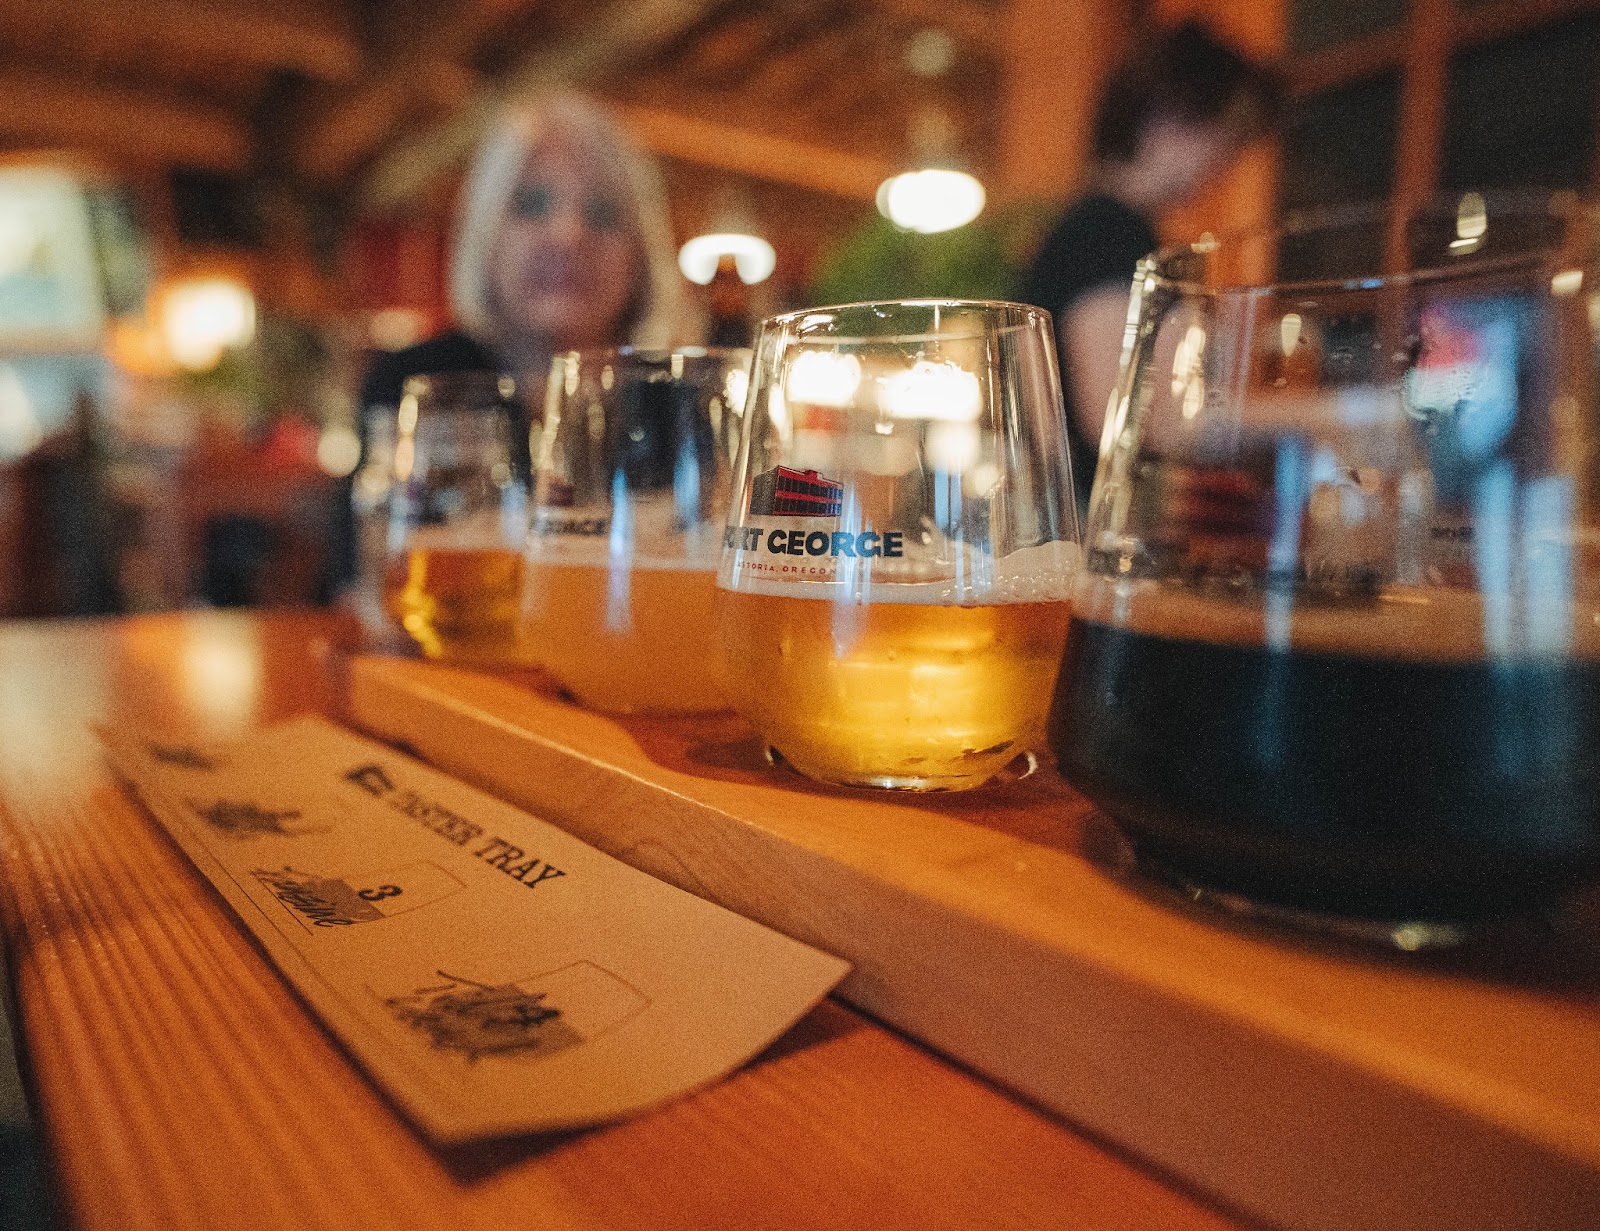 Fort George is a must-visit brewery / restaurant in Astoria, Oregon. It is also accessible for wheelchair-users.